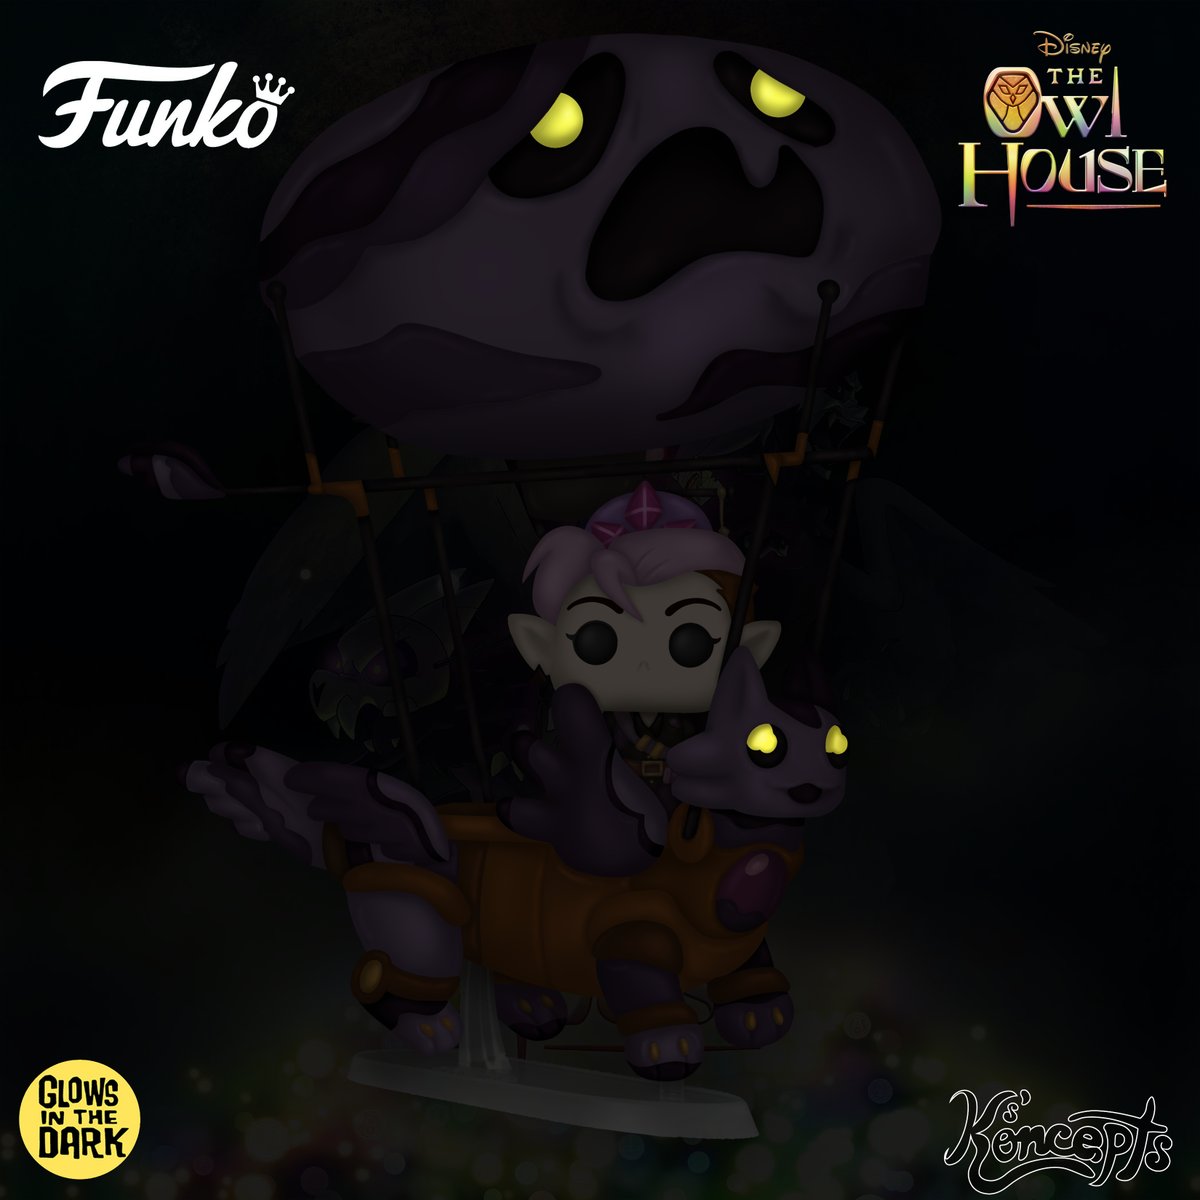 #546 Funko Pop! Box & Pop Concept: Amity with Abomination Airship (Timeskip) (The Owl House)        

#TheOwlHouse #owlhouse #danaterrace #amity #amityblight #abomination #maewhitman #lumity #watchinganddreaming #disney #funkopopconcept #ksfunkoconcepts